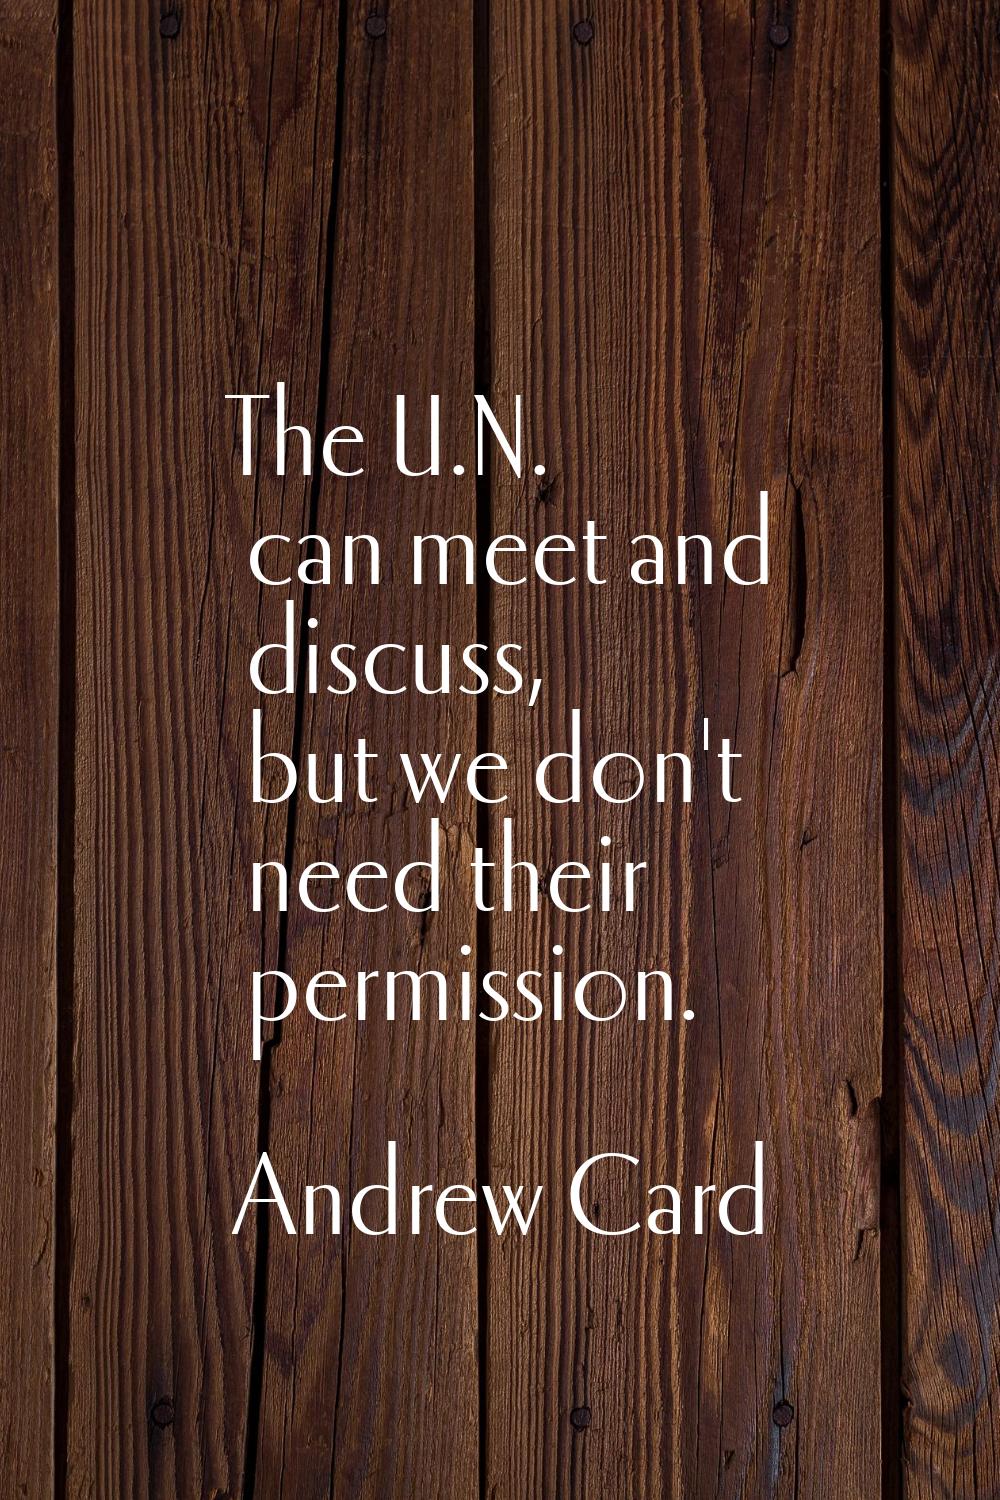 The U.N. can meet and discuss, but we don't need their permission.